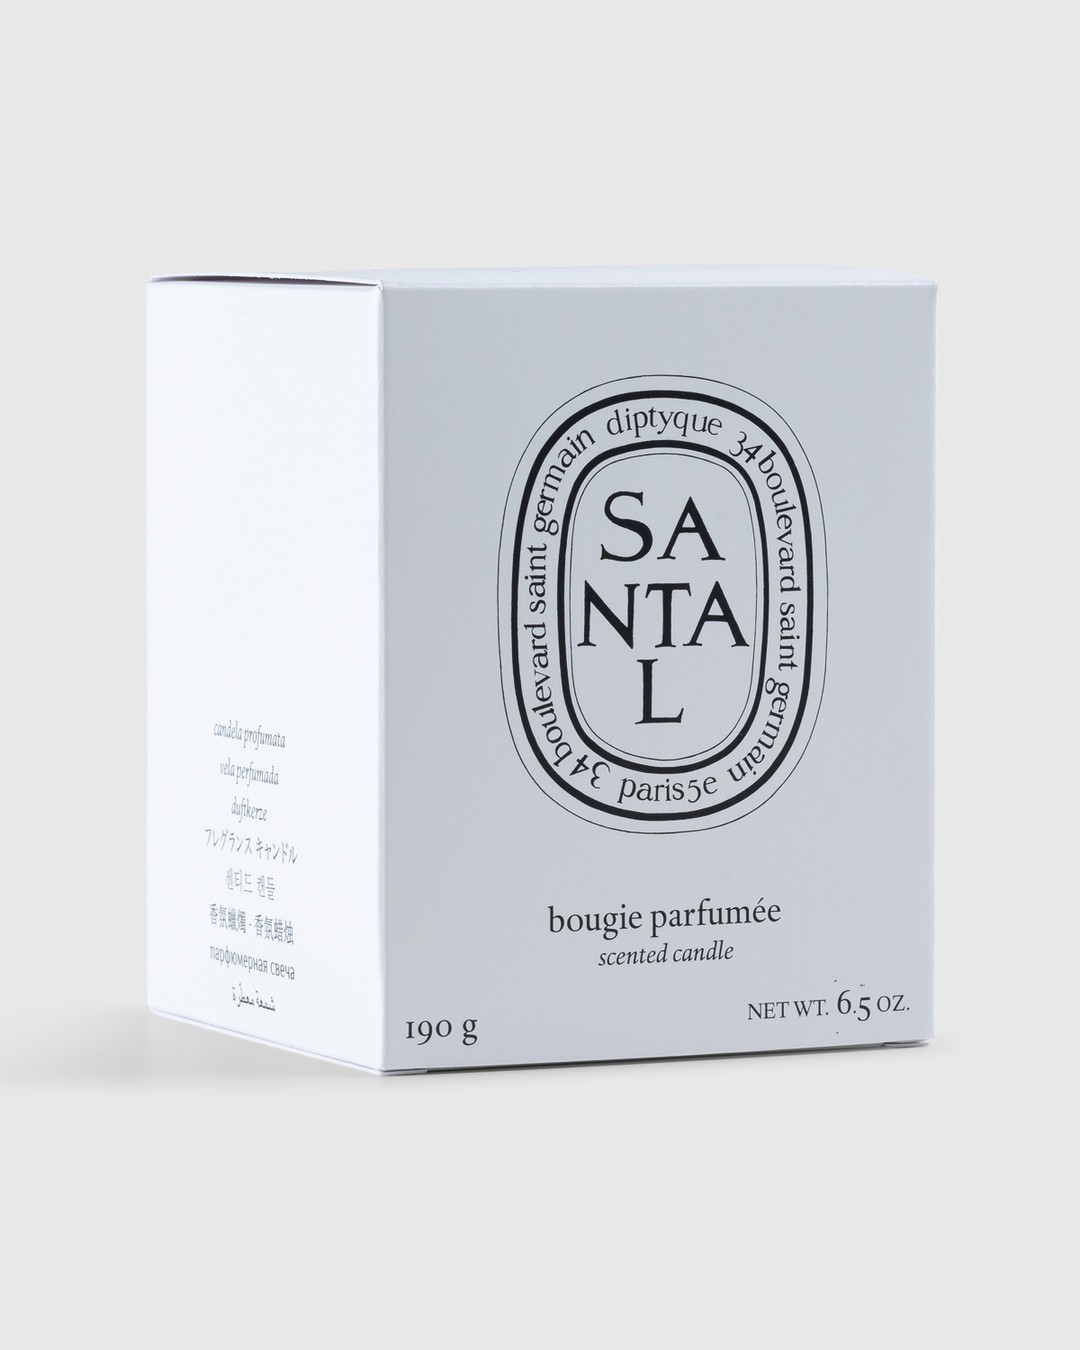 Diptyque – Standard Candle Santal 190g - Candles - White - Image 3